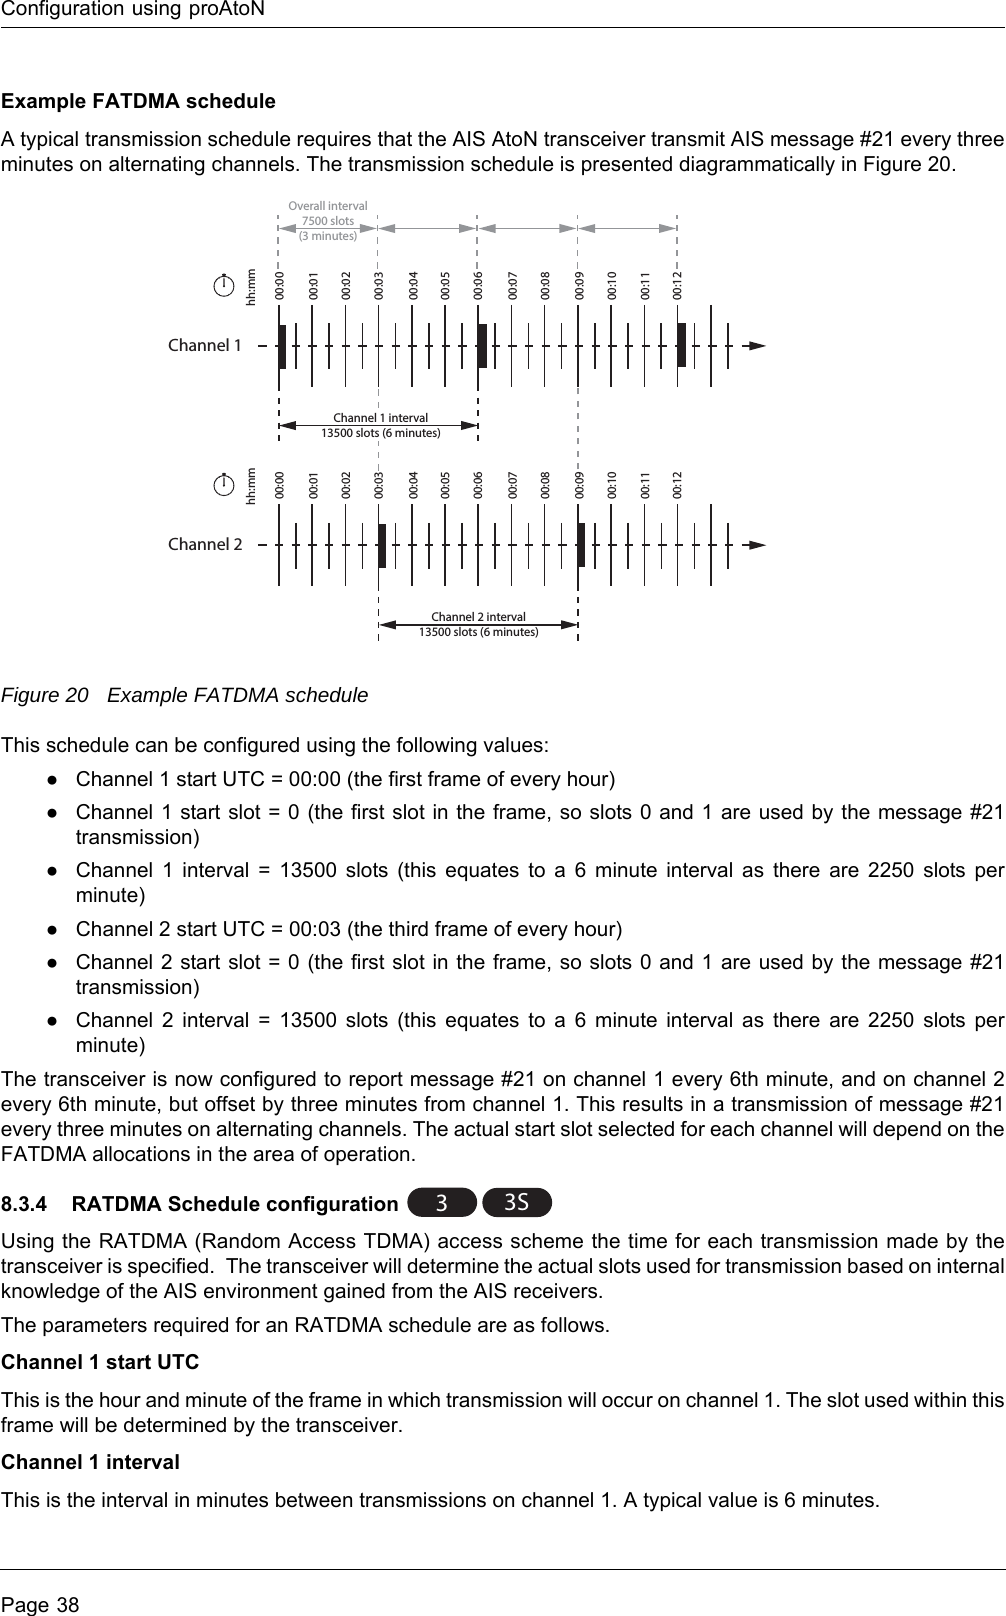 Configuration using proAtoNPage 38Example FATDMA scheduleA typical transmission schedule requires that the AIS AtoN transceiver transmit AIS message #21 every three minutes on alternating channels. The transmission schedule is presented diagrammatically in Figure 20.Figure 20 Example FATDMA scheduleThis schedule can be configured using the following values:●Channel 1 start UTC = 00:00 (the first frame of every hour)●Channel 1 start slot = 0 (the first slot in the frame, so slots 0 and 1 are used by the message #21 transmission)●Channel 1 interval = 13500 slots (this equates to a 6 minute interval as there are 2250 slots per minute)●Channel 2 start UTC = 00:03 (the third frame of every hour)●Channel 2 start slot = 0 (the first slot in the frame, so slots 0 and 1 are used by the message #21 transmission)●Channel 2 interval = 13500 slots (this equates to a 6 minute interval as there are 2250 slots per minute)The transceiver is now configured to report message #21 on channel 1 every 6th minute, and on channel 2 every 6th minute, but offset by three minutes from channel 1. This results in a transmission of message #21 every three minutes on alternating channels. The actual start slot selected for each channel will depend on the FATDMA allocations in the area of operation.8.3.4 RATDMA Schedule configuration Using the RATDMA (Random Access TDMA) access scheme the time for each transmission made by the transceiver is specified. The transceiver will determine the actual slots used for transmission based on internal knowledge of the AIS environment gained from the AIS receivers.The parameters required for an RATDMA schedule are as follows.Channel 1 start UTCThis is the hour and minute of the frame in which transmission will occur on channel 1. The slot used within this frame will be determined by the transceiver.Channel 1 intervalThis is the interval in minutes between transmissions on channel 1. A typical value is 6 minutes.Channel 100:0100:0200:0300:0400:0500:0600:0700:0800:0900:1000:1100:1200:00hh:mmChannel 1 interval13500 slots (6 minutes)Channel 200:0100:0200:0300:0400:0500:0600:0700:0800:0900:1000:1100:1200:00hh:mmChannel 2 interval13500 slots (6 minutes)Overall interval7500 slots(3 minutes)33S